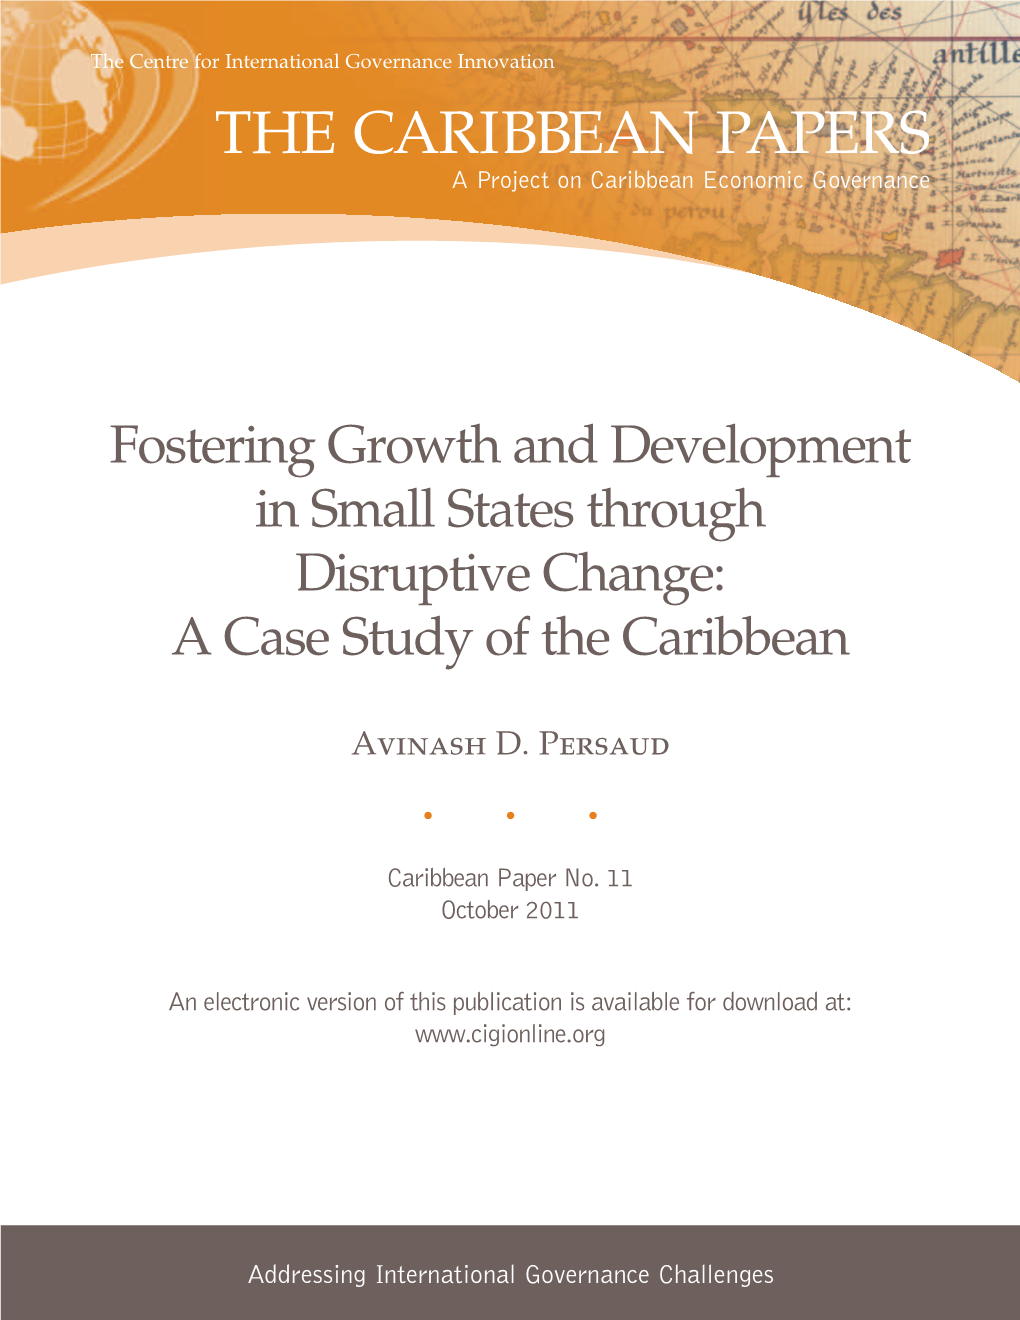 Fostering Growth and Development in Small States Through Disruptive Change: a Case Study of the Caribbean